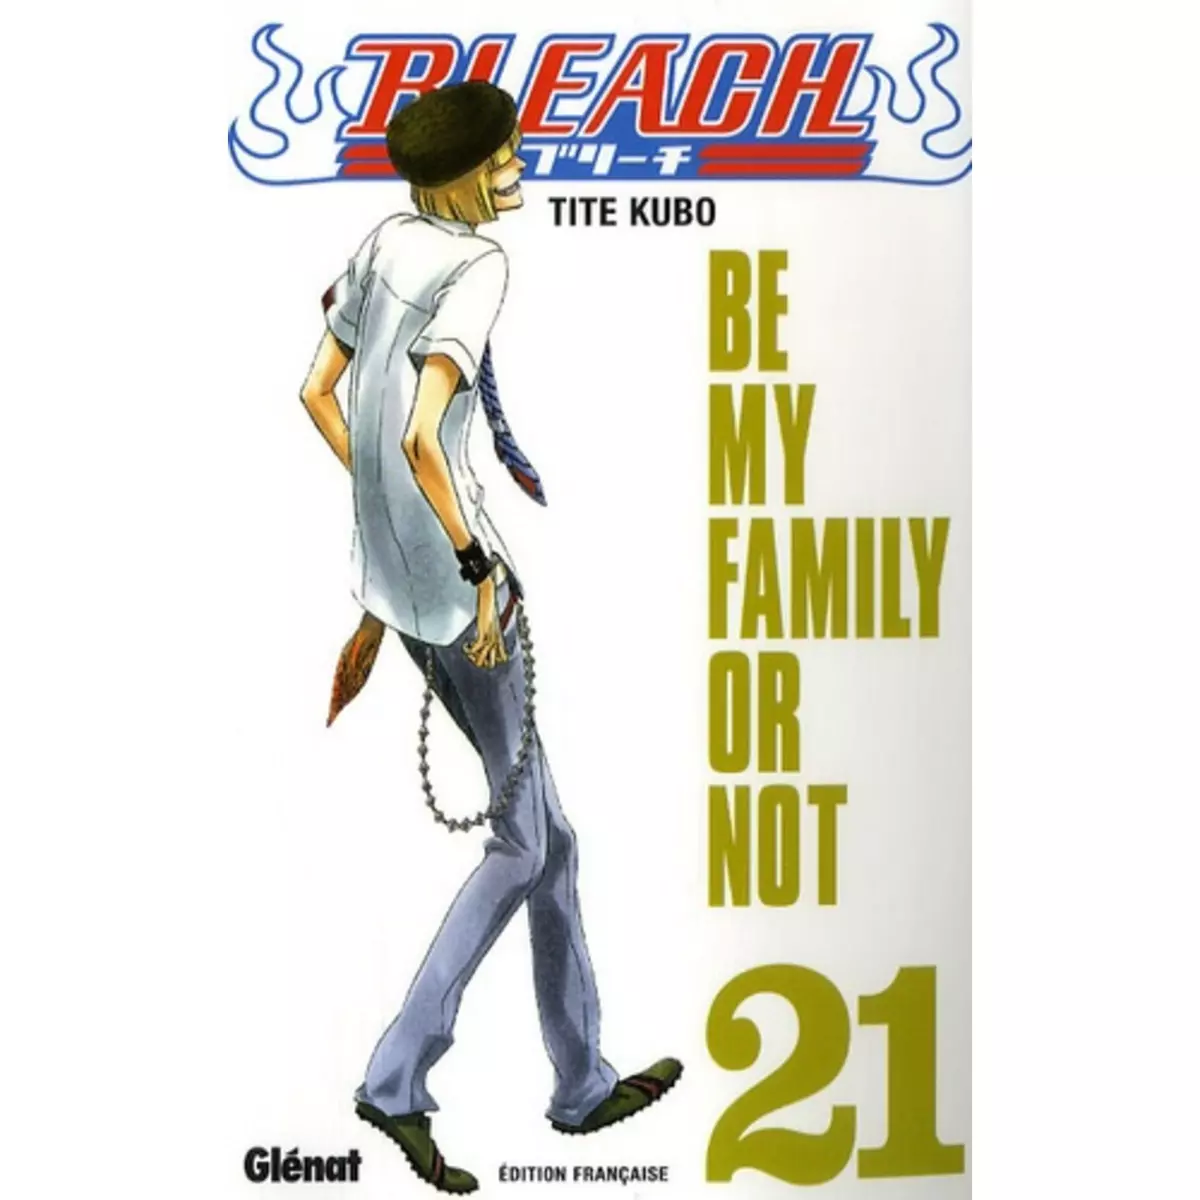  BLEACH TOME 21 : BE MY FAMILY OR NOT, Kubo Tite